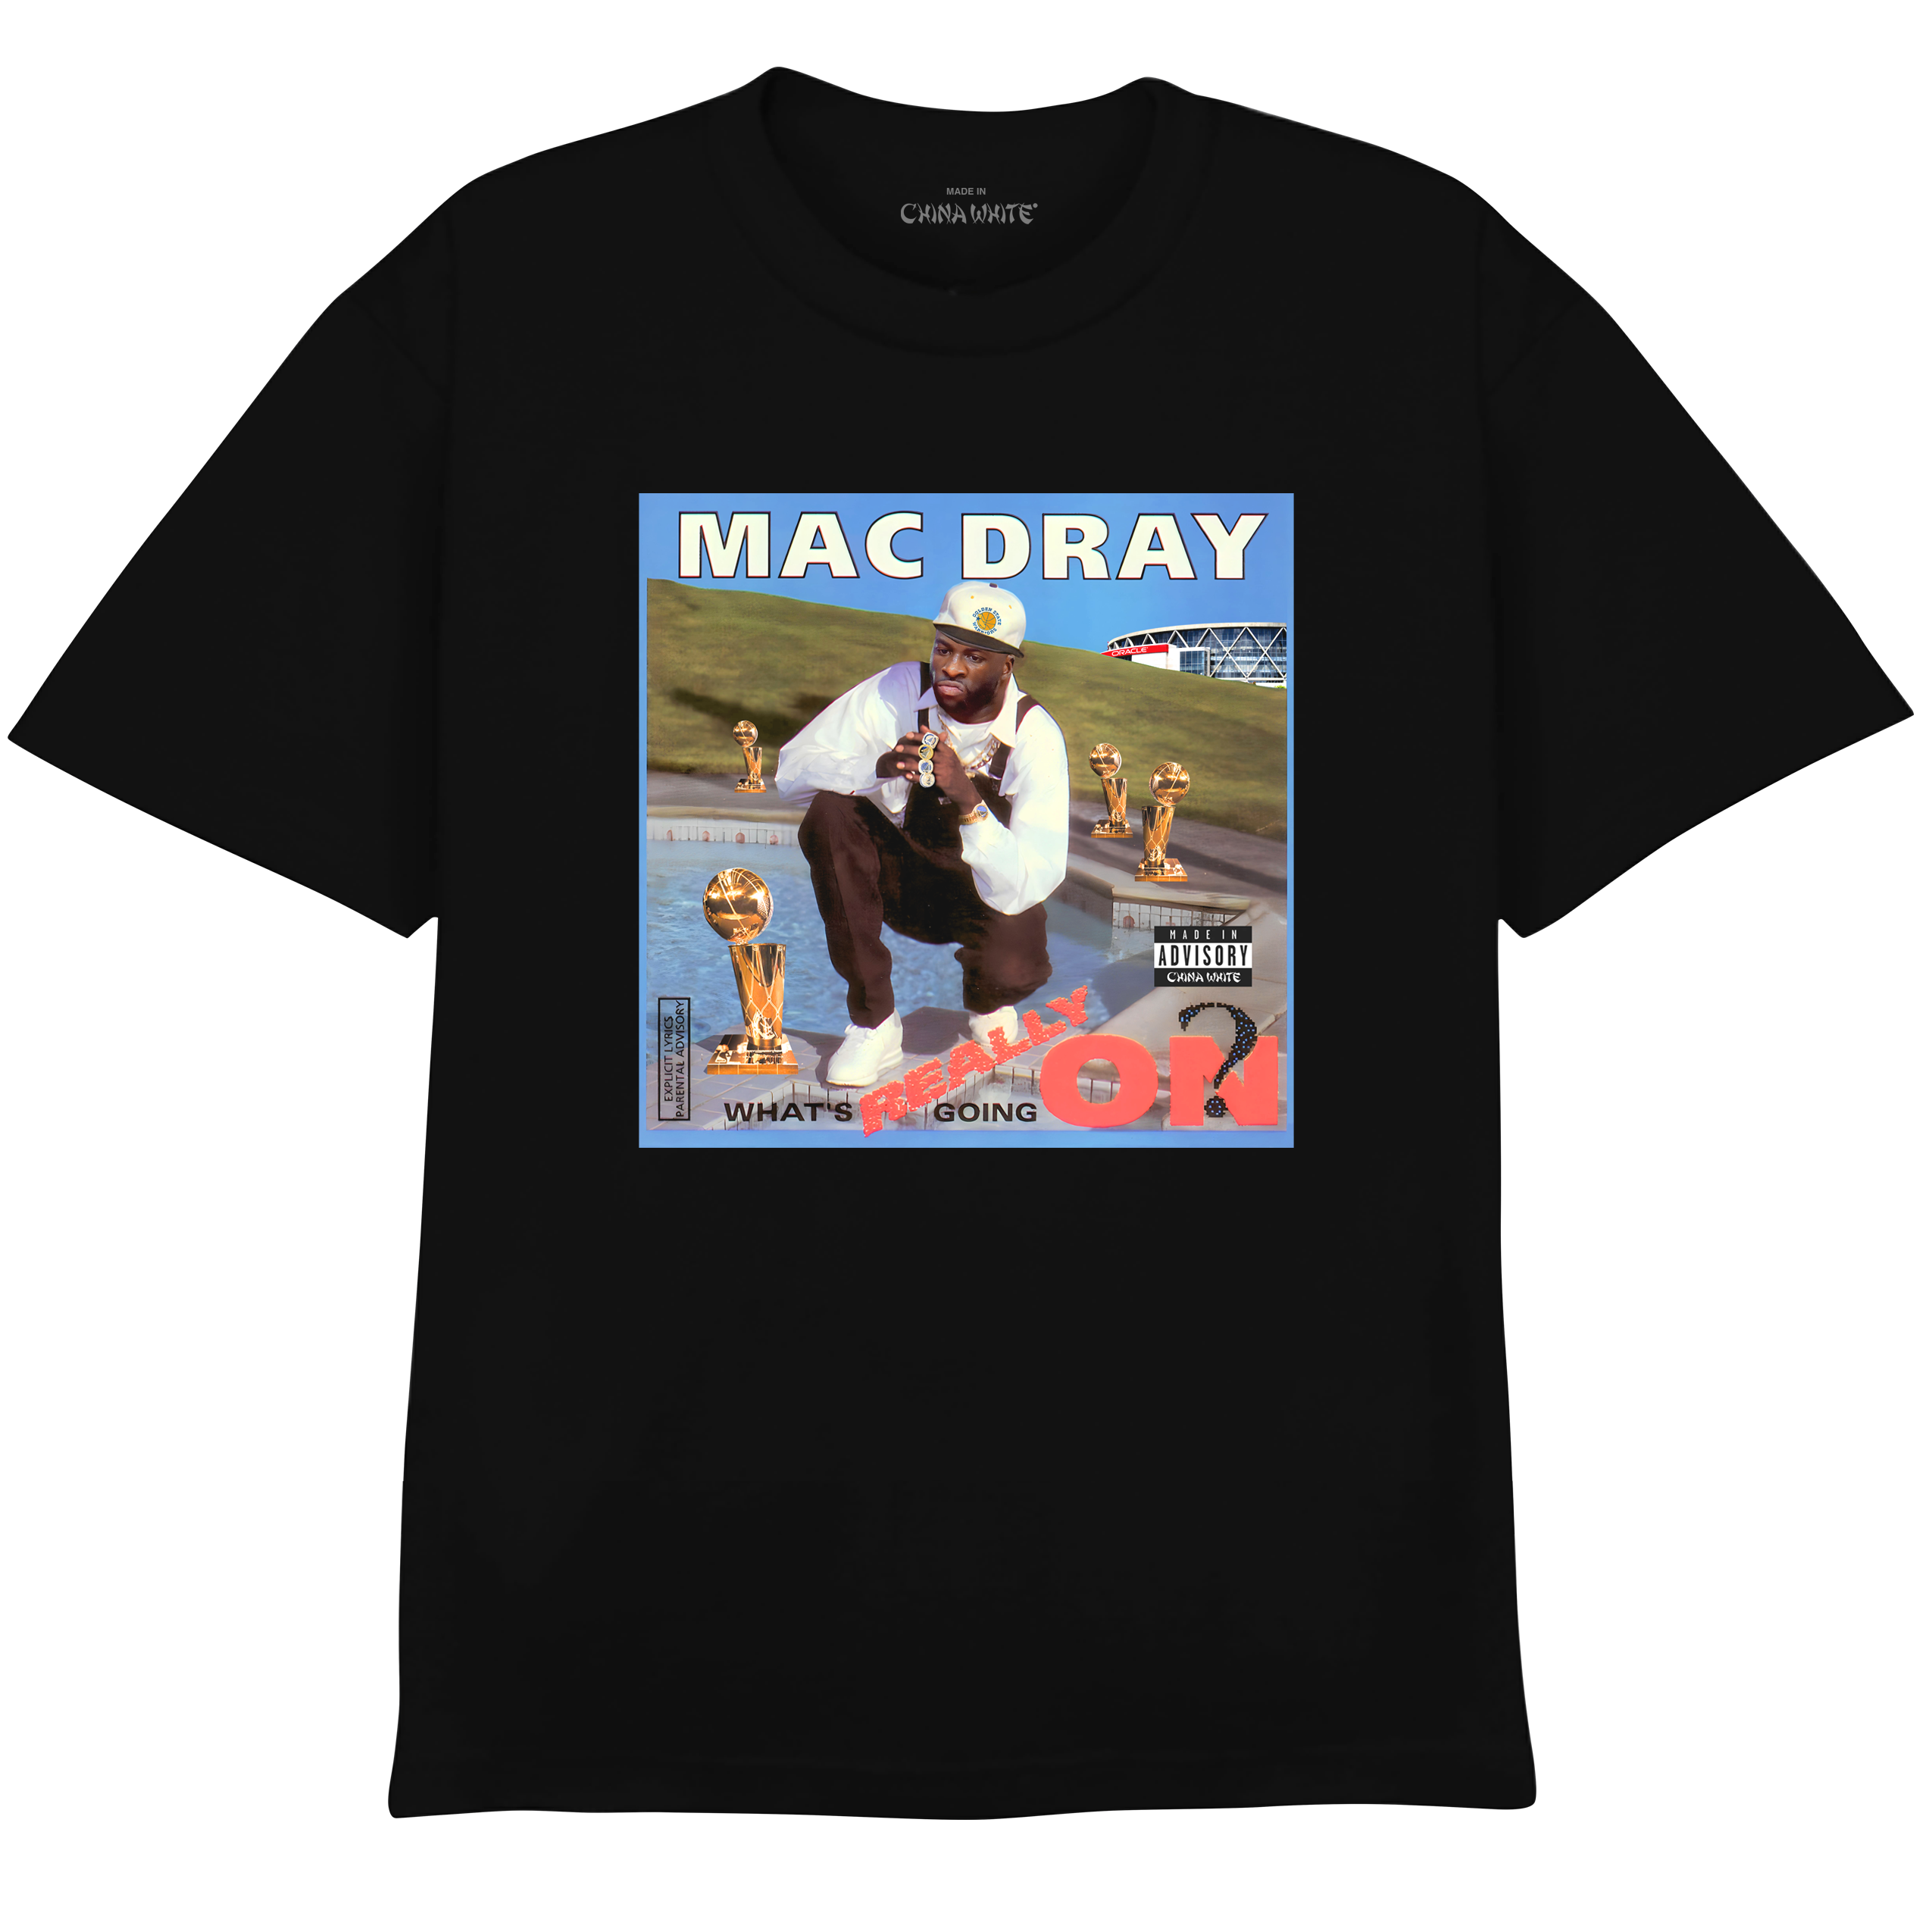 MAC DRAY - WHAT'S REALLY GOING ON?